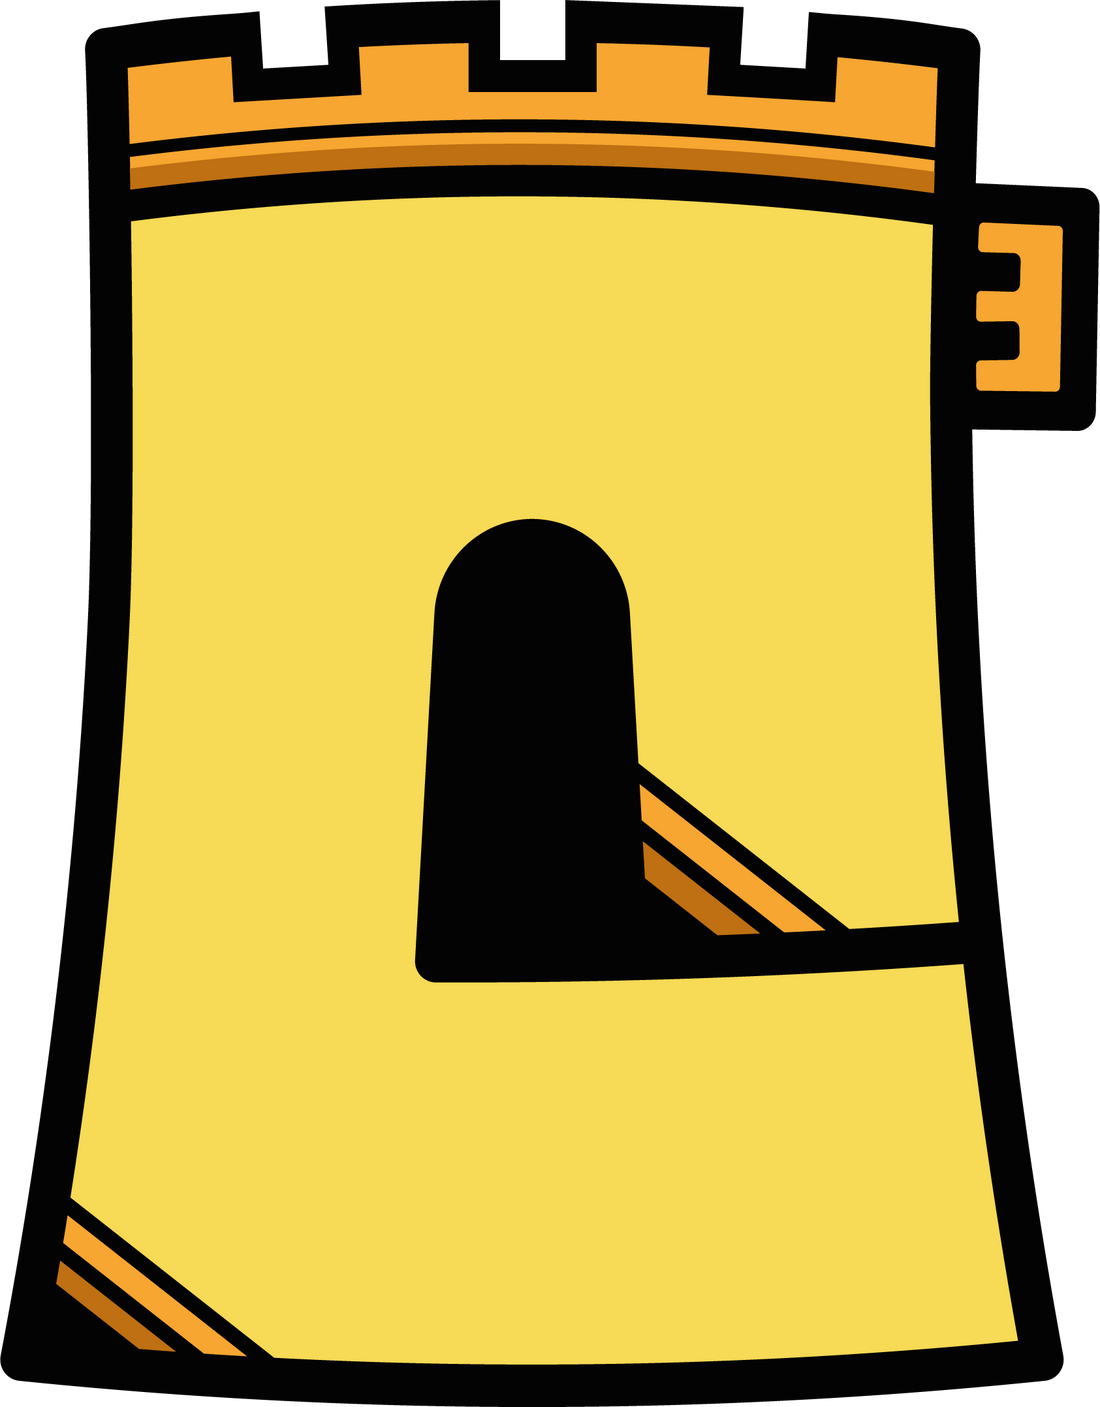 cotton castle logo. a yellow castle turret in the shape of the letter C with a central doorway and a cubed integer at top right side.